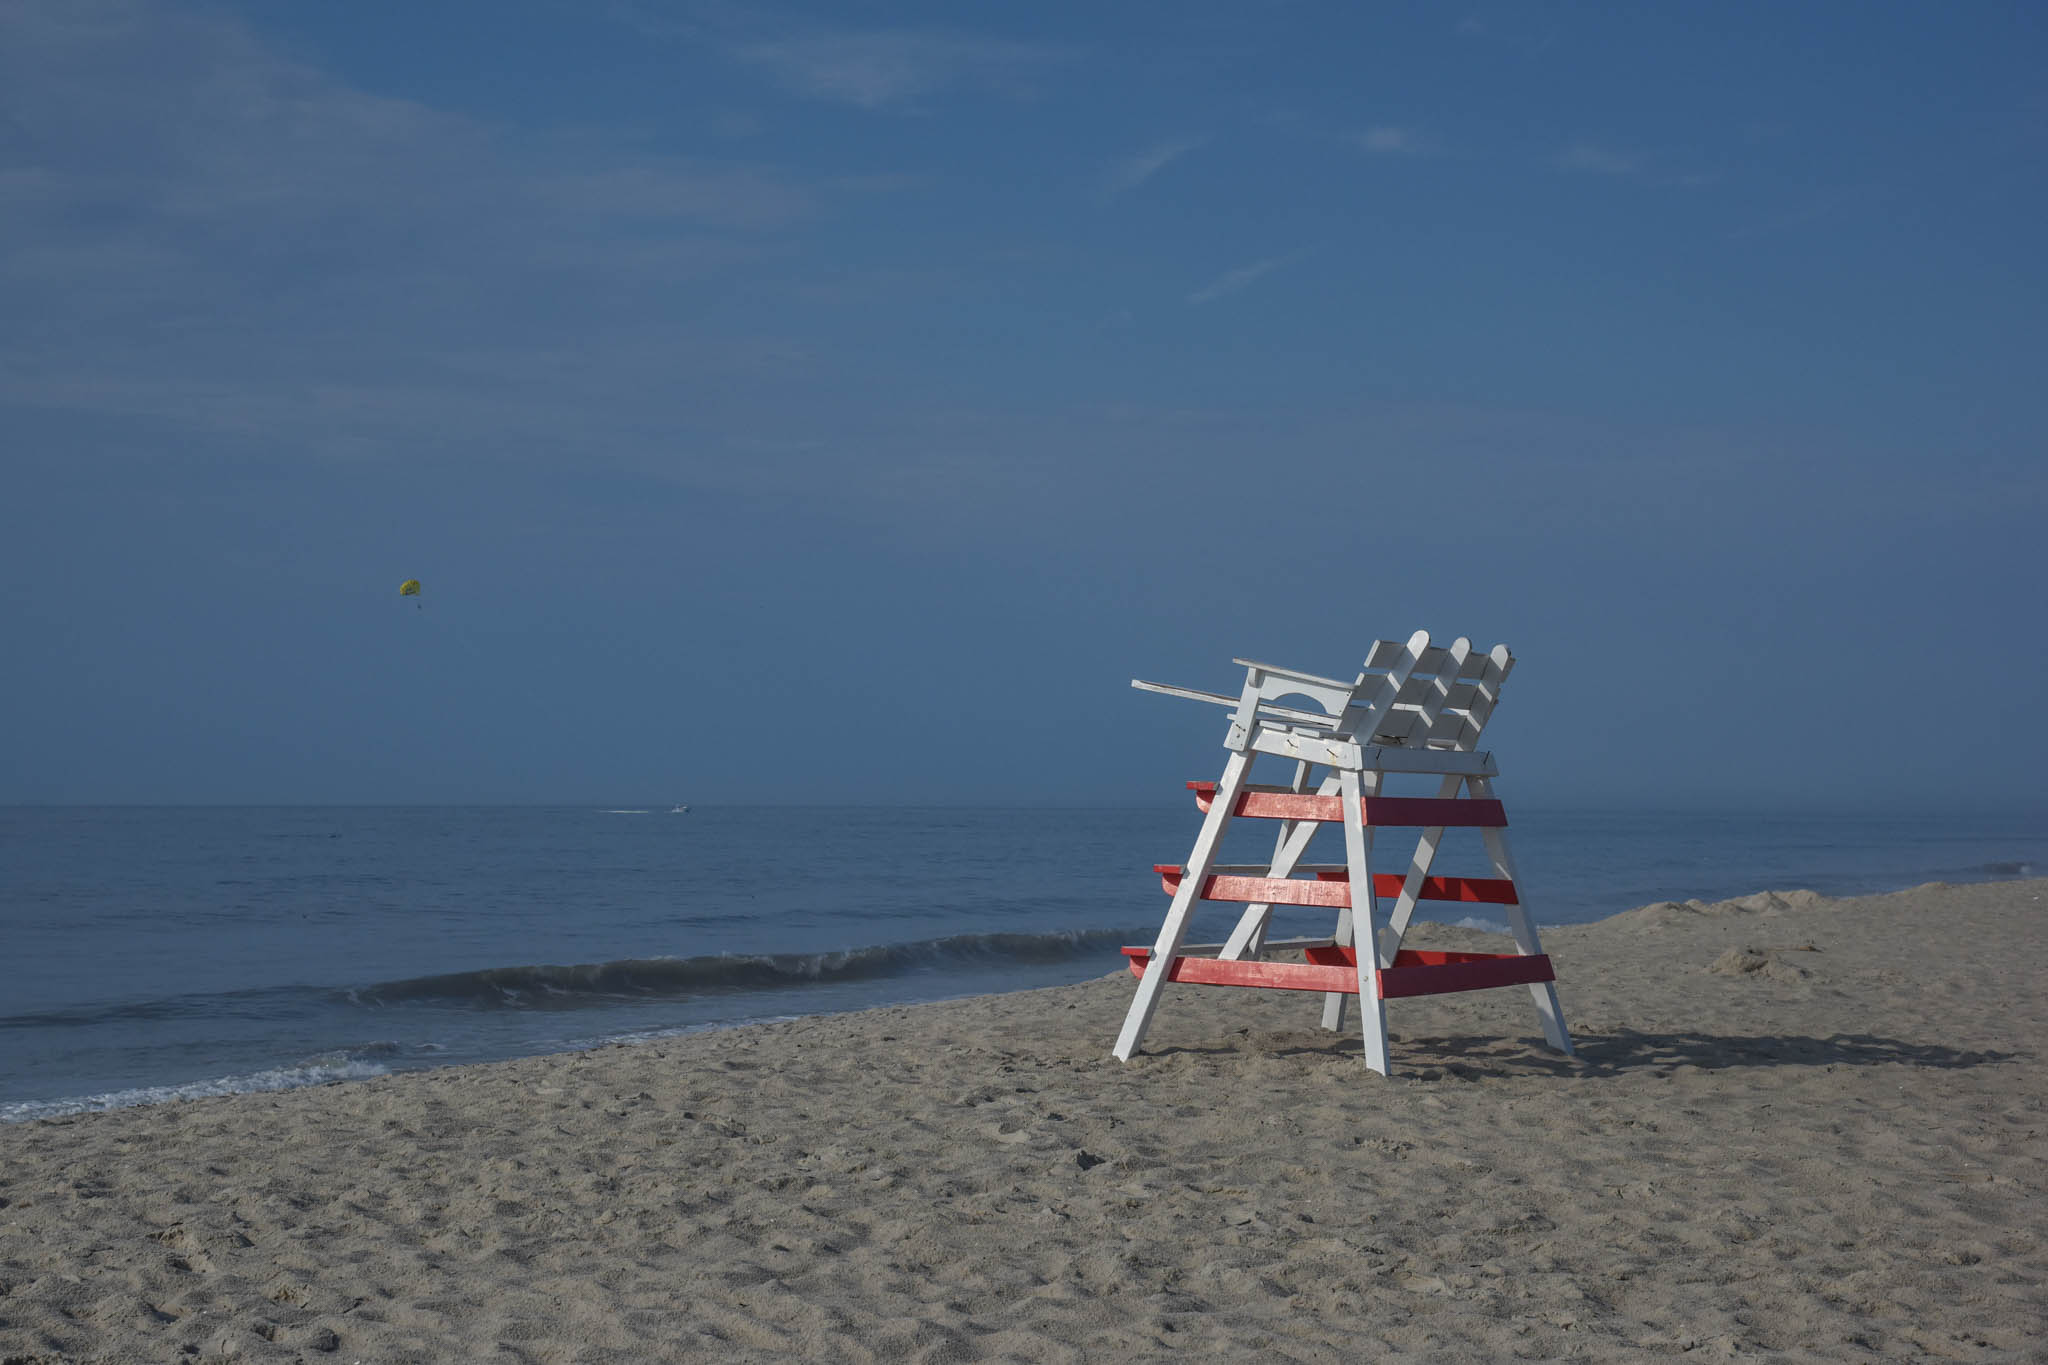 Lifeguard chair on the beach early morning.